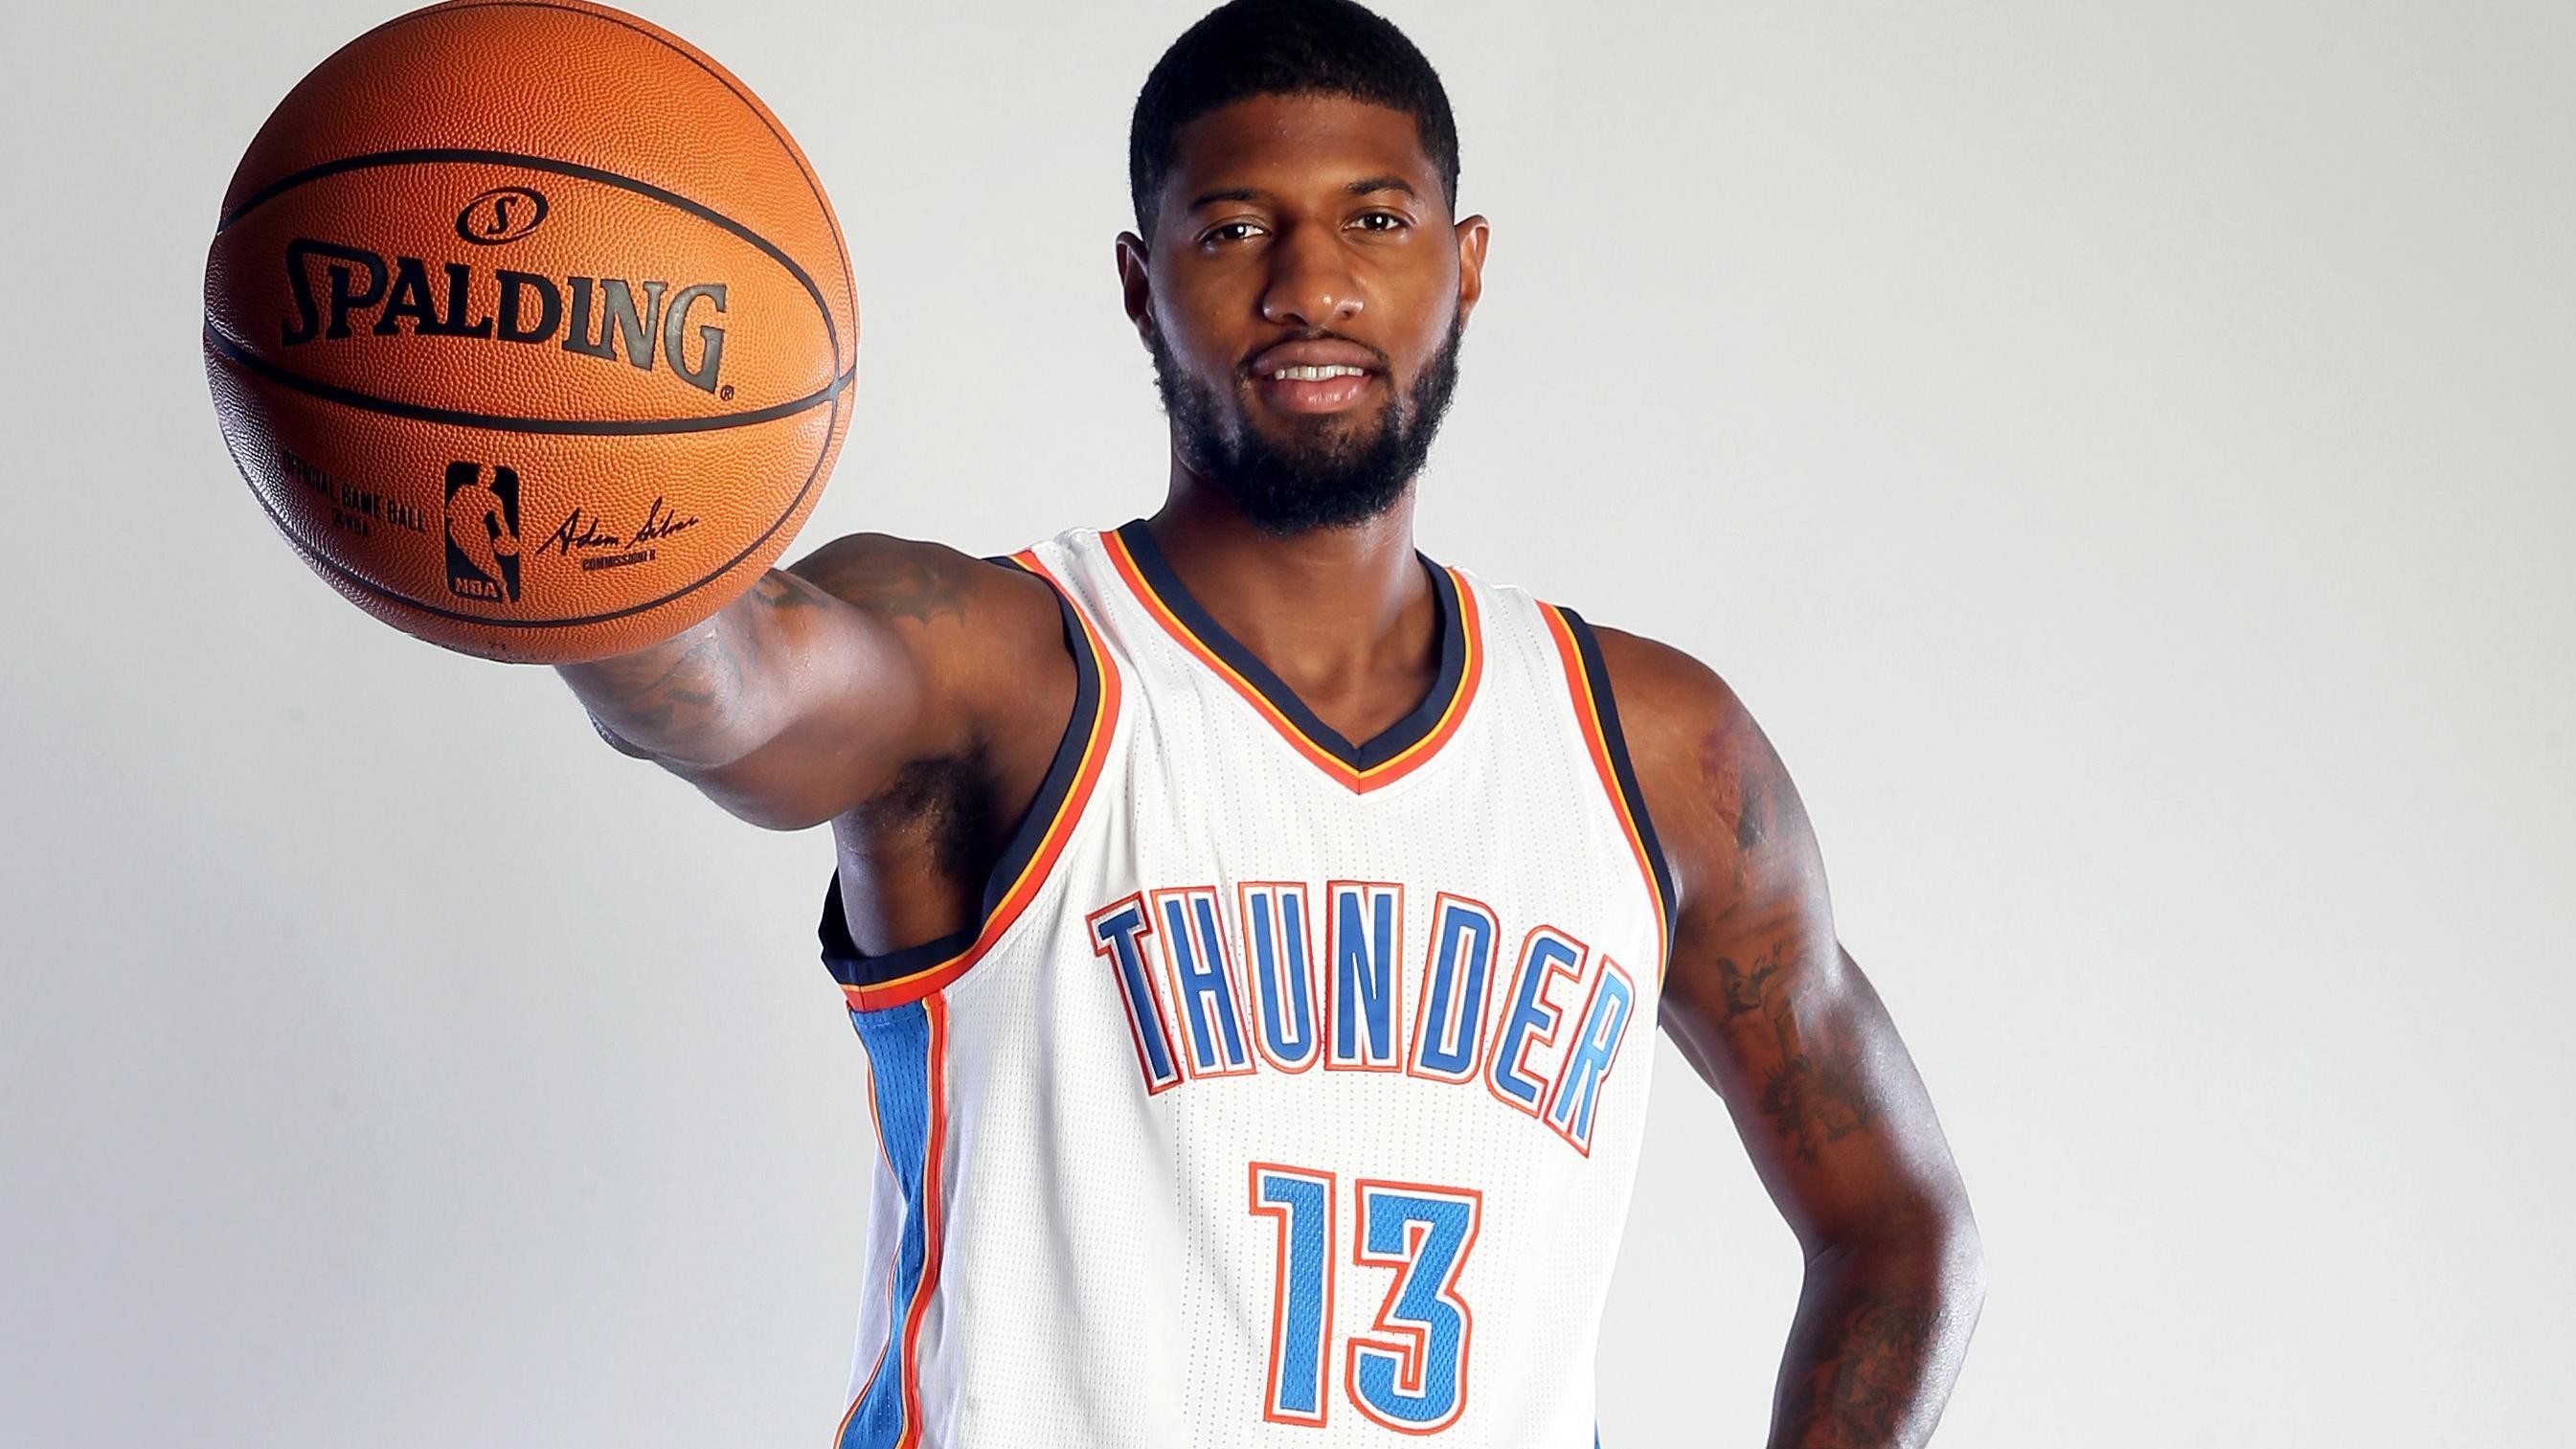 Image result for paul george thunder photoshoot